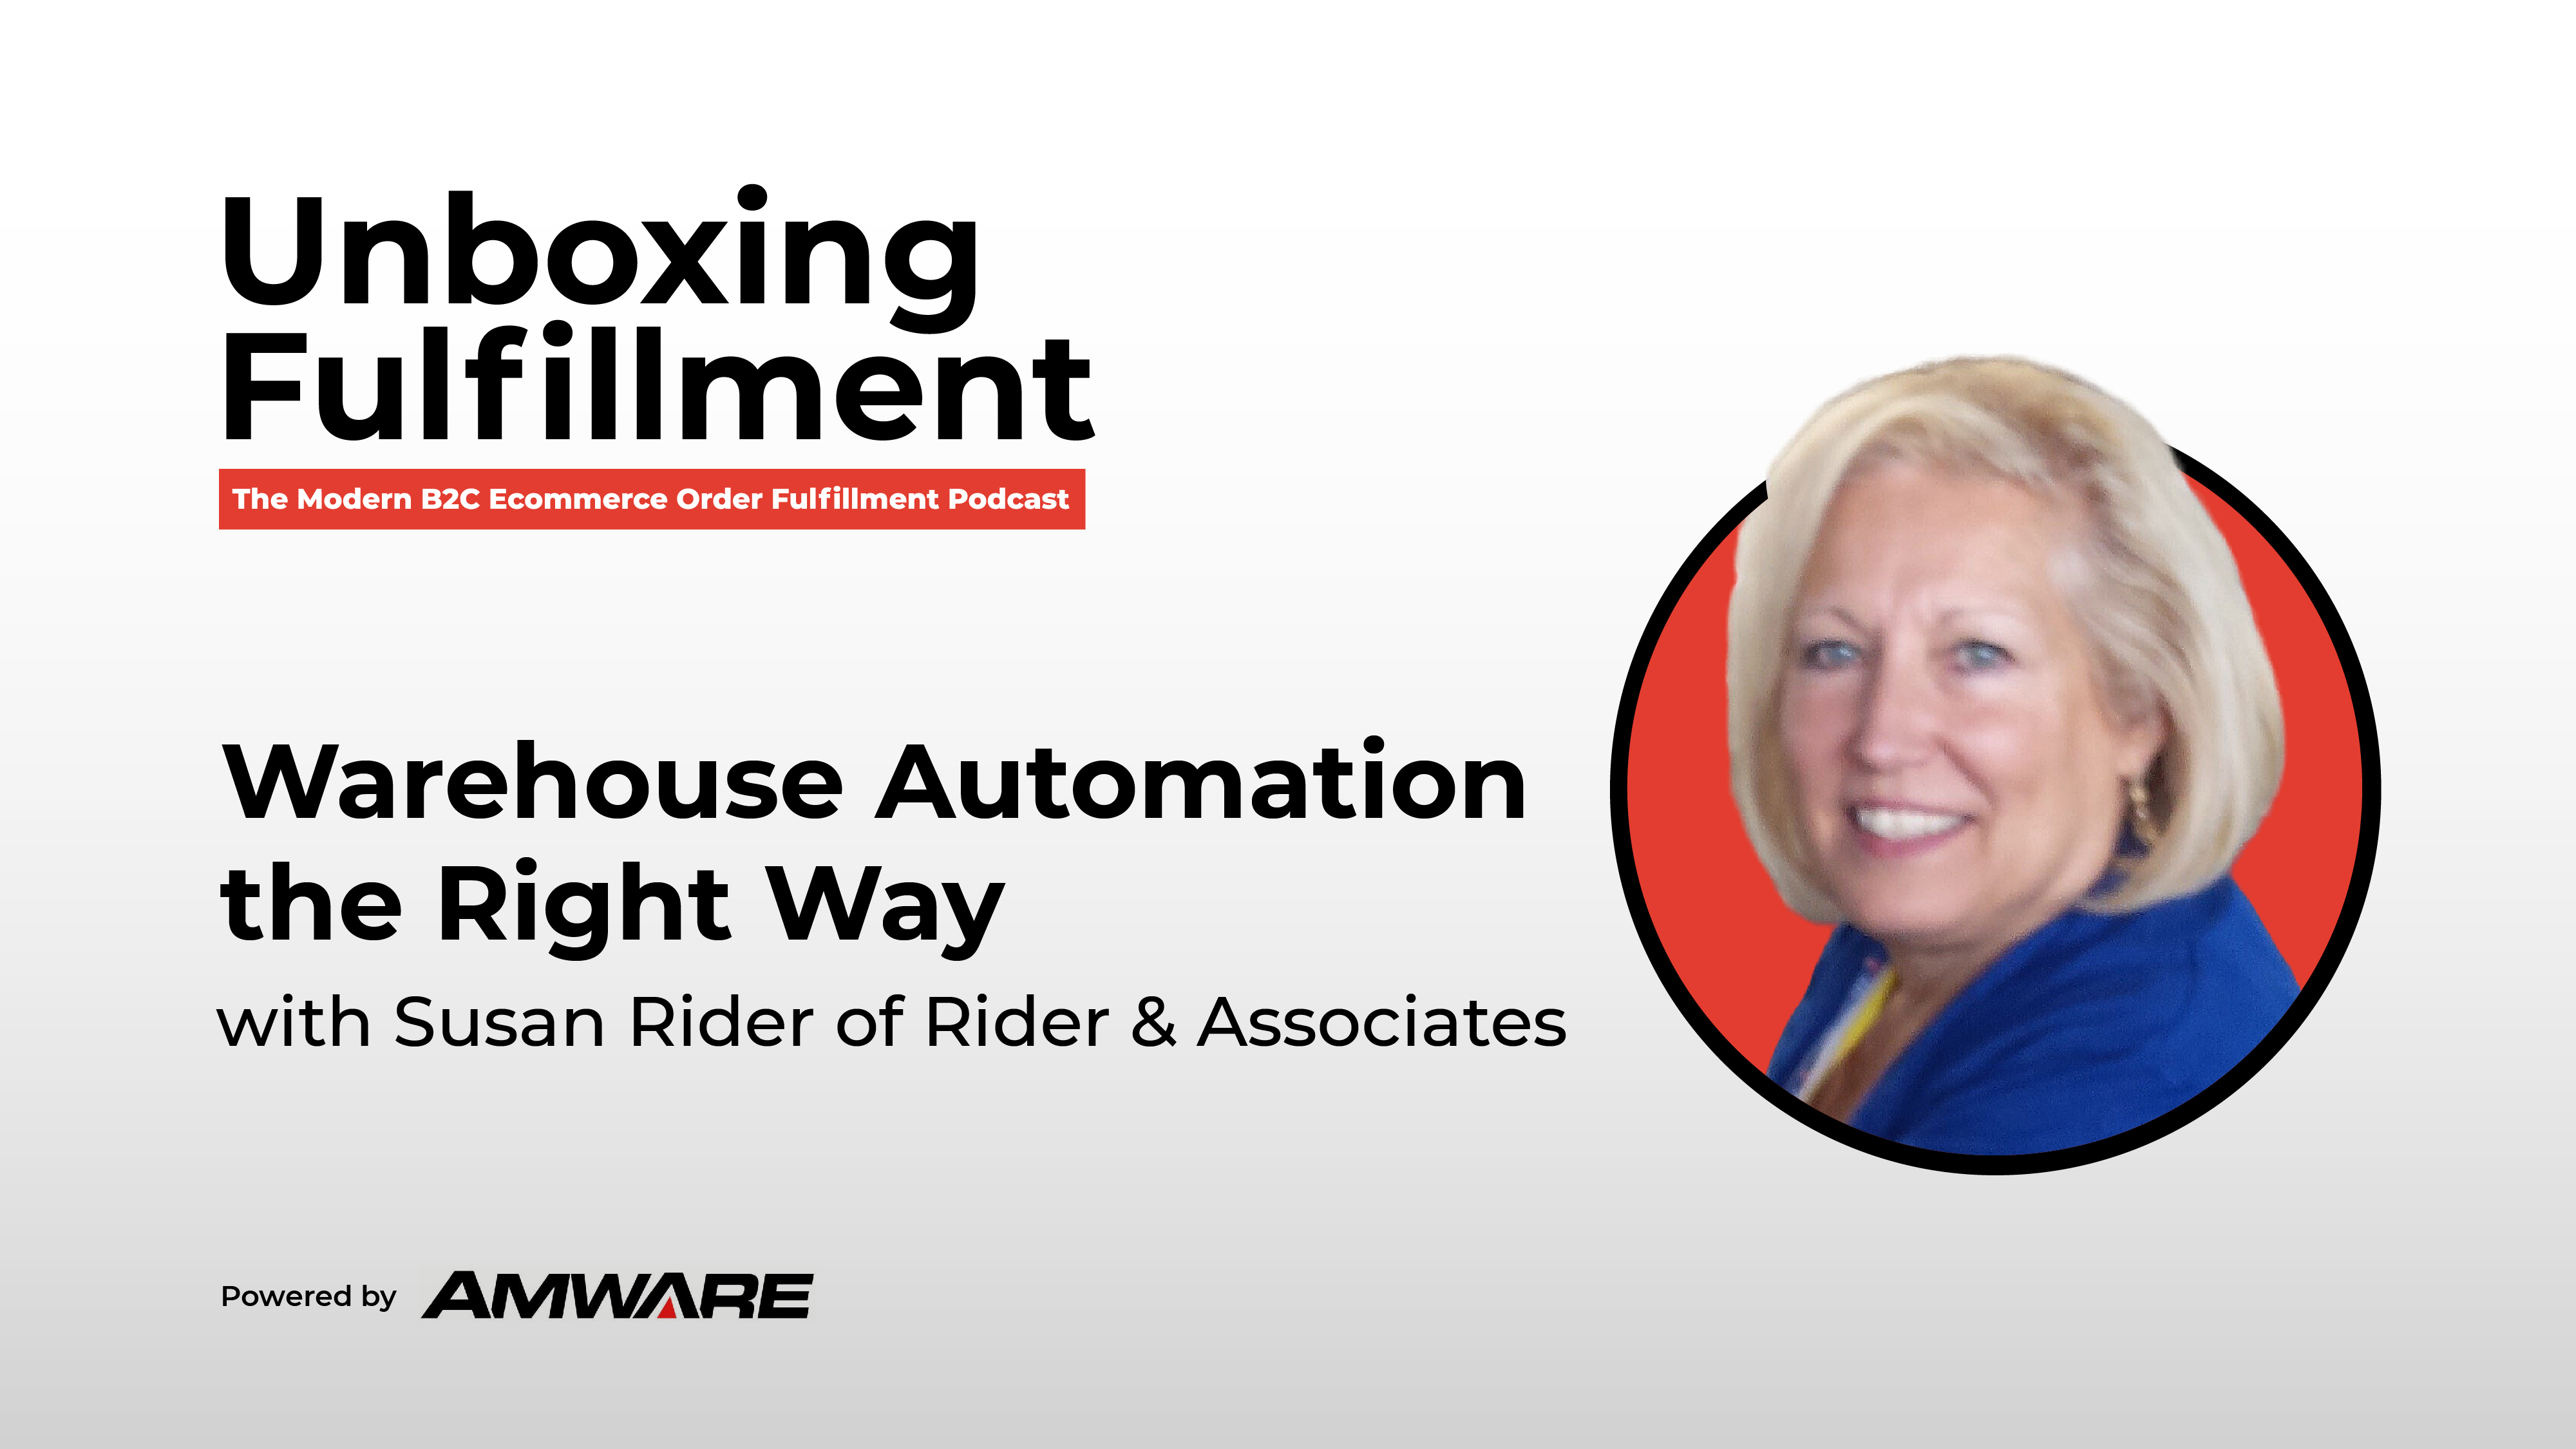 Warehouse Automation the Right Way with Susan Rider of Rider & Associates